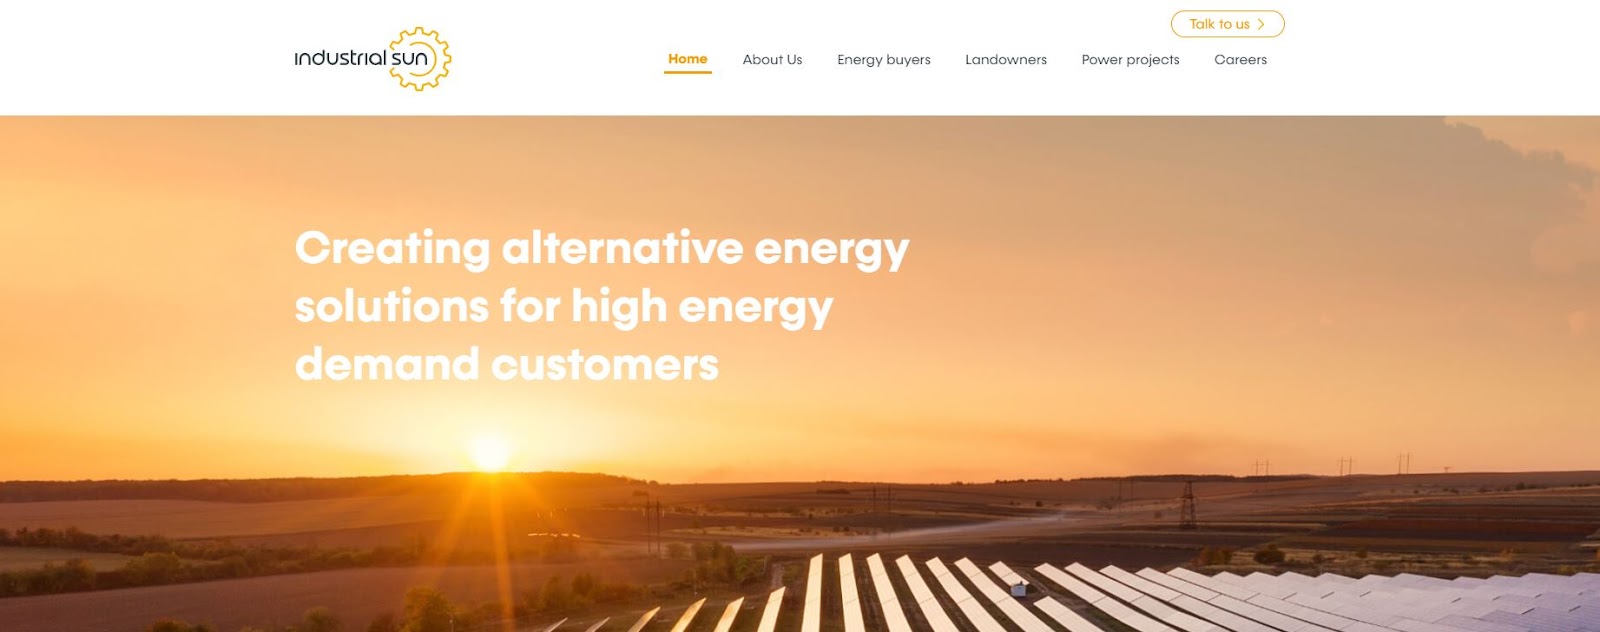 Industrial Sun, a renewable energy and storage developer